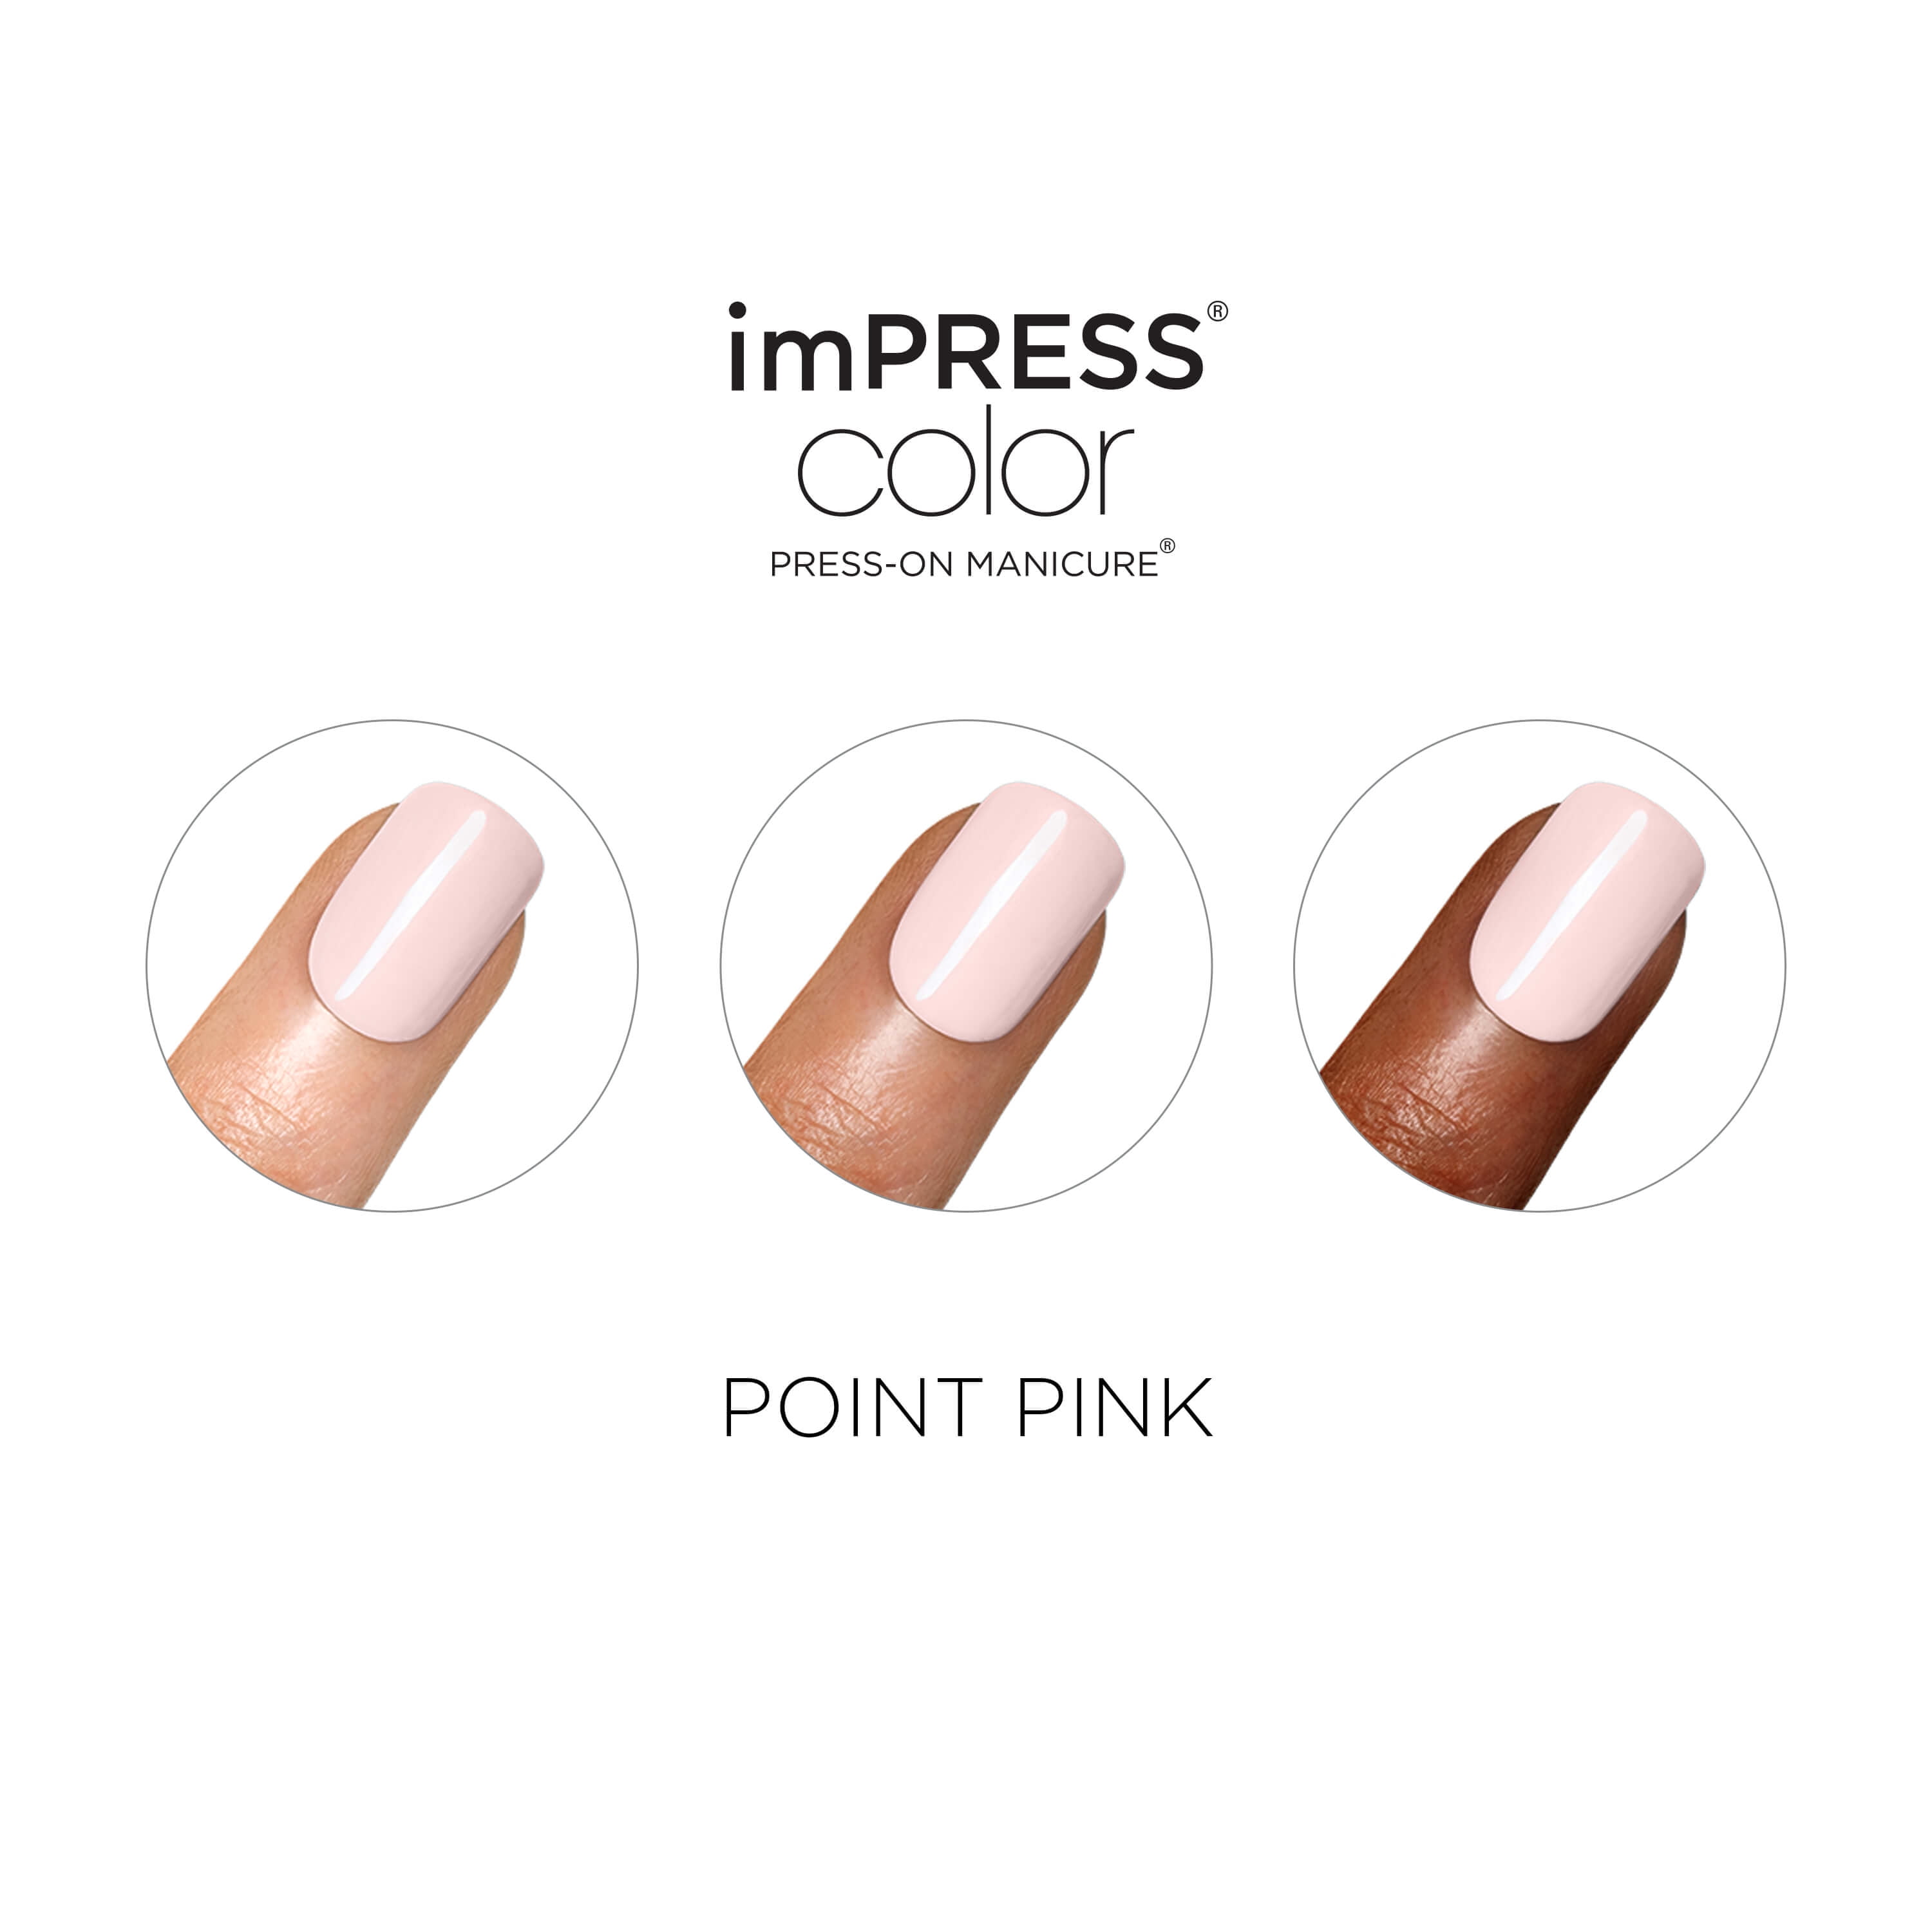 imPRESS Nails: My Completely Honest Review - Money Saving Mom®